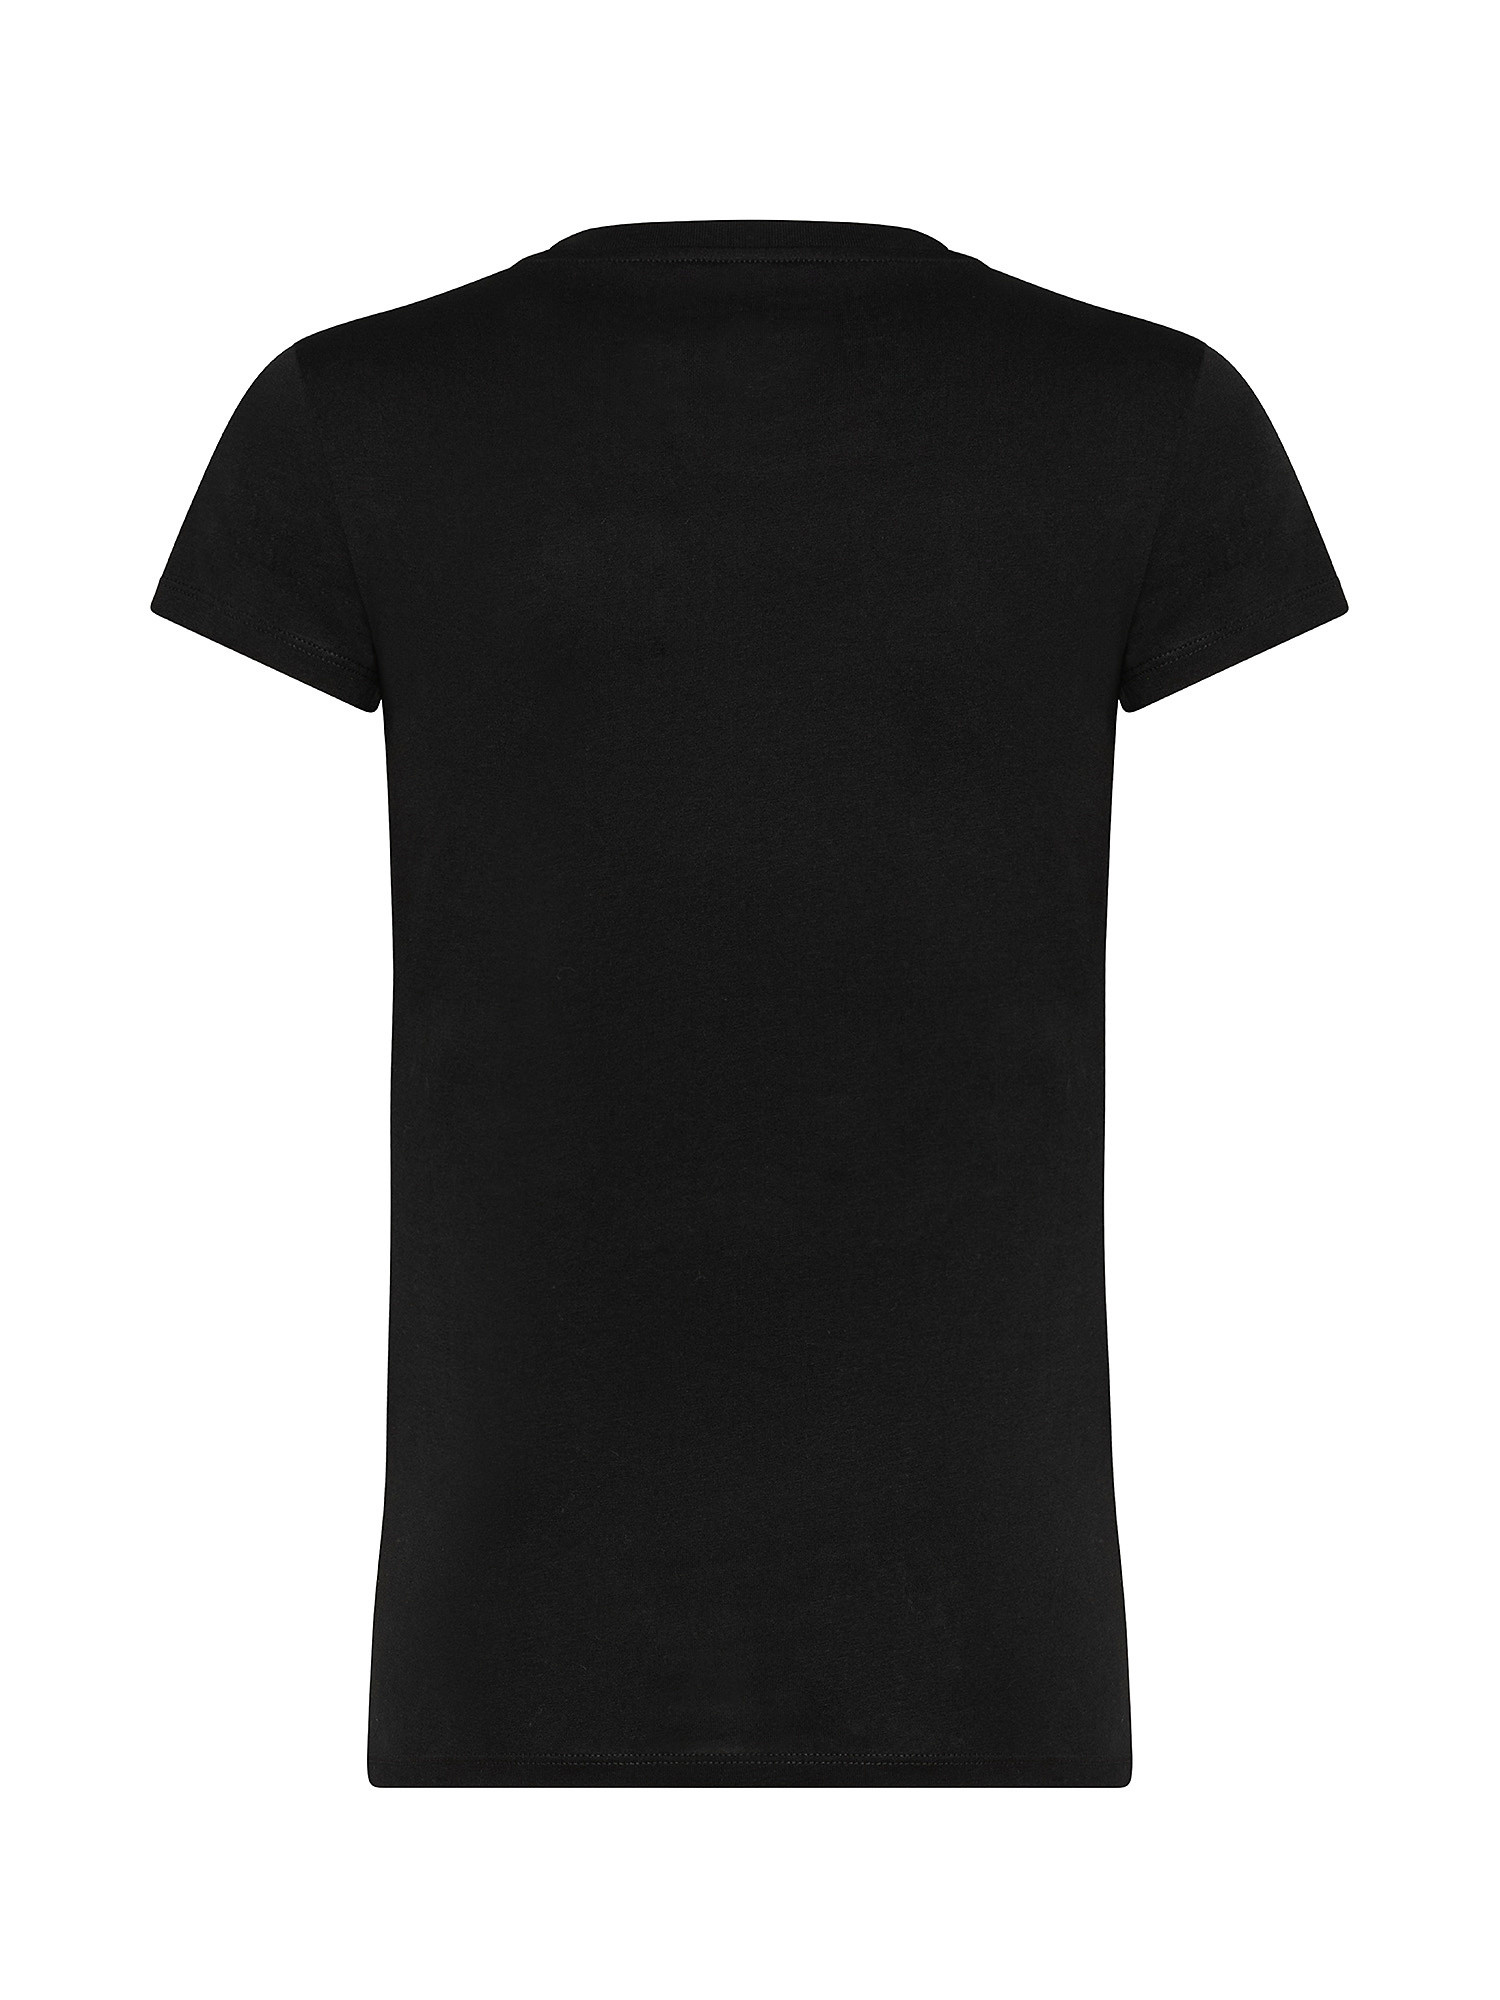 T-shirt with print, Black, large image number 1